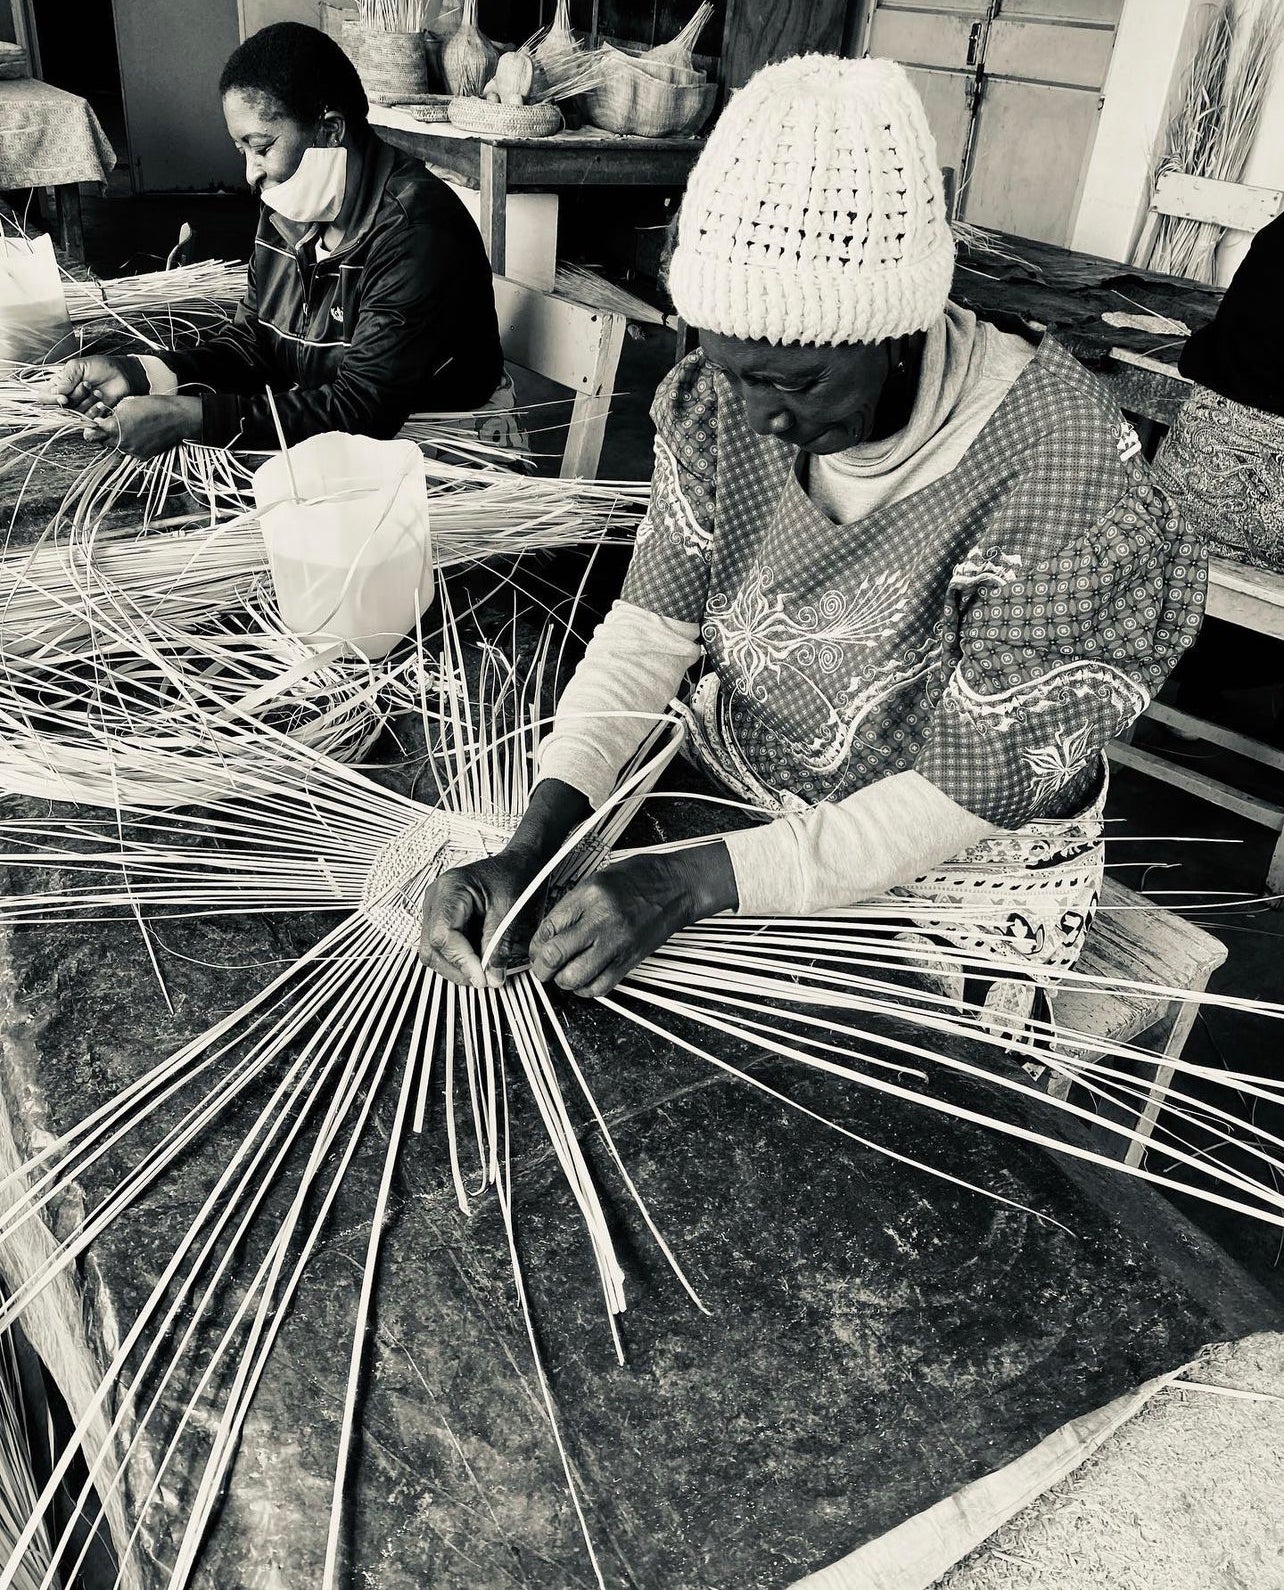 Artisans at work crafting Kanju Garlic Gourd Baskets, capturing the essence of African luxury craftsmanship. This image shows the skilled process of weaving, highlighting the traditional techniques used to create these unique, high-end home decor items.